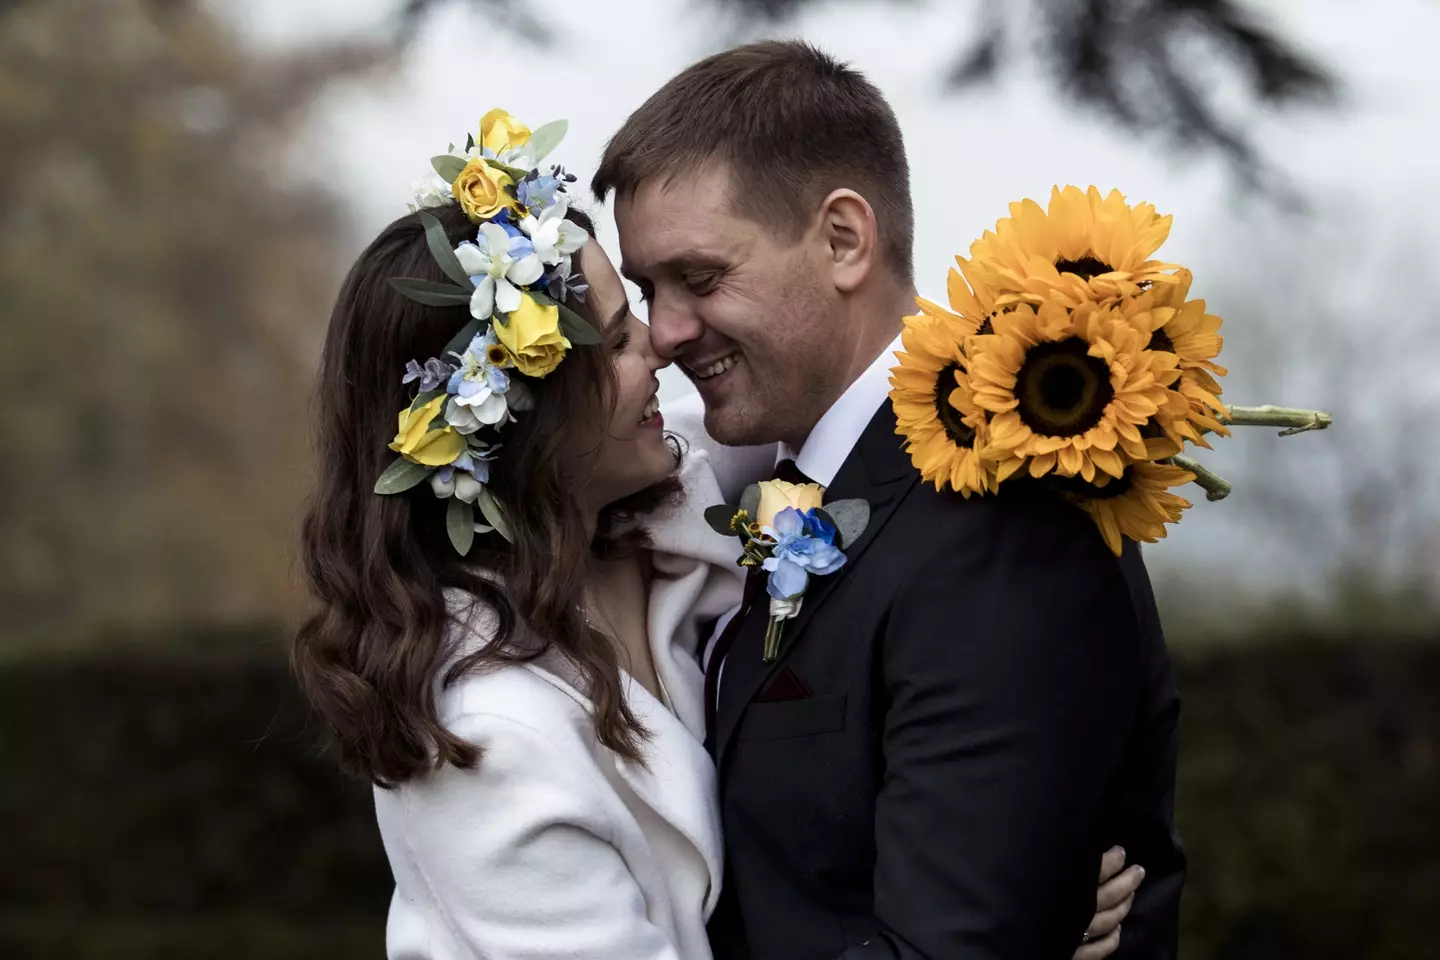 The Ukrainian couple tied the knot in the UK.